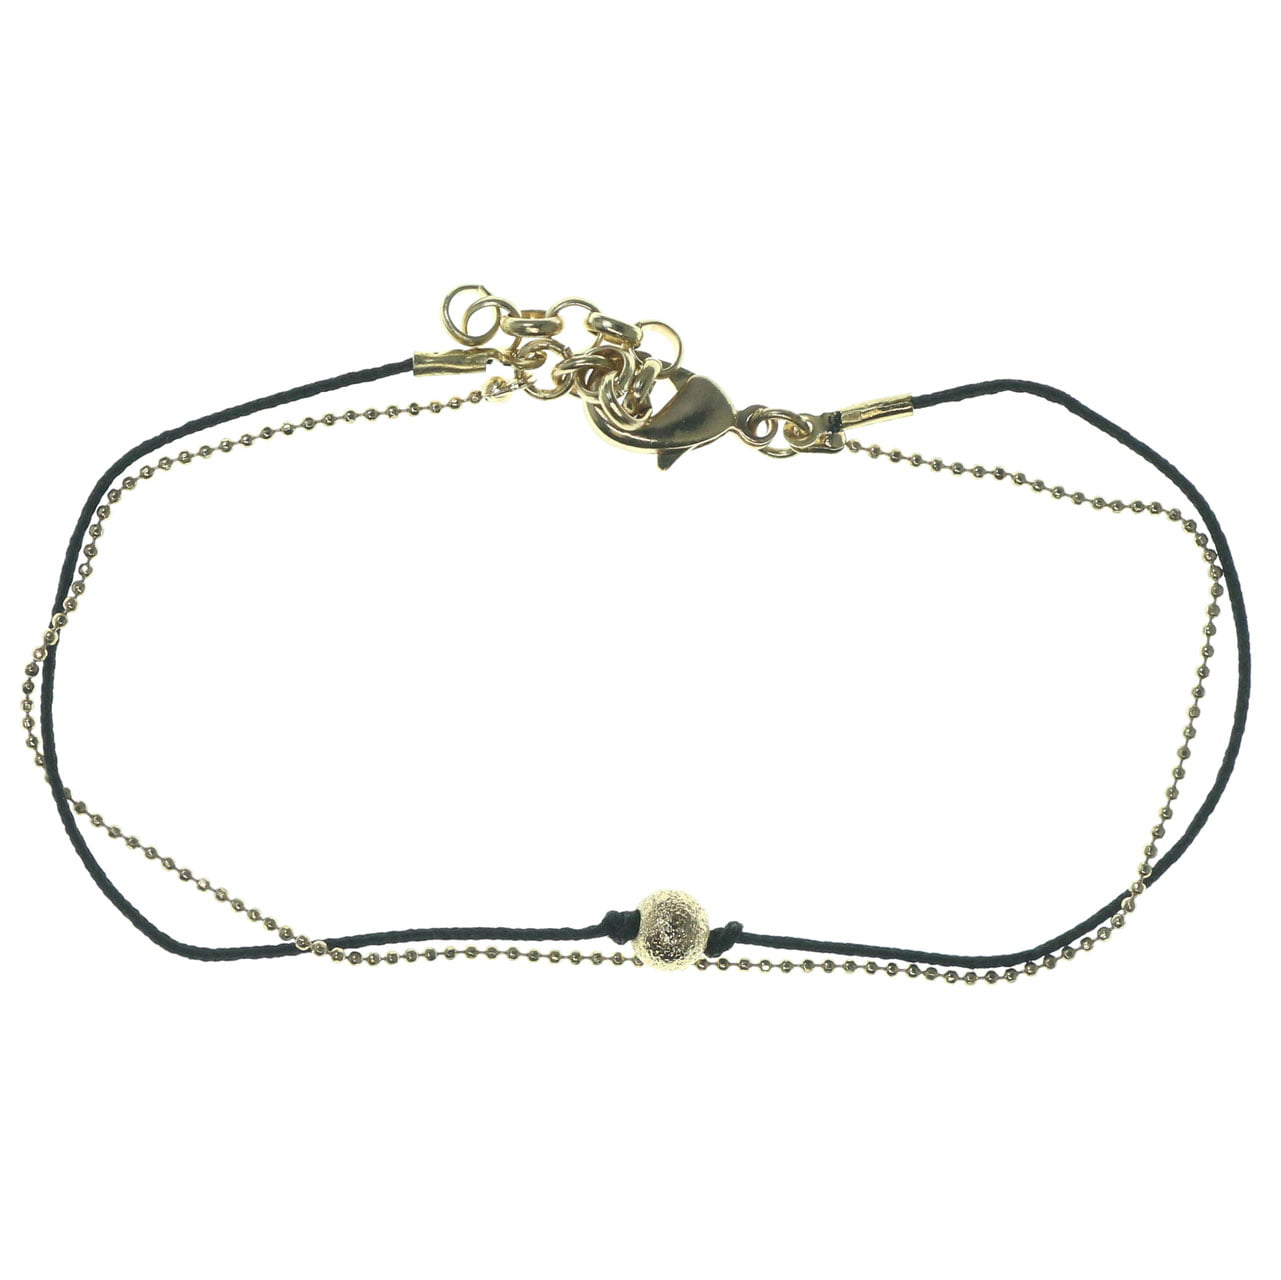 Thin, Black String Bracelet With Gold-Tone Bead Accent B9833BLK 